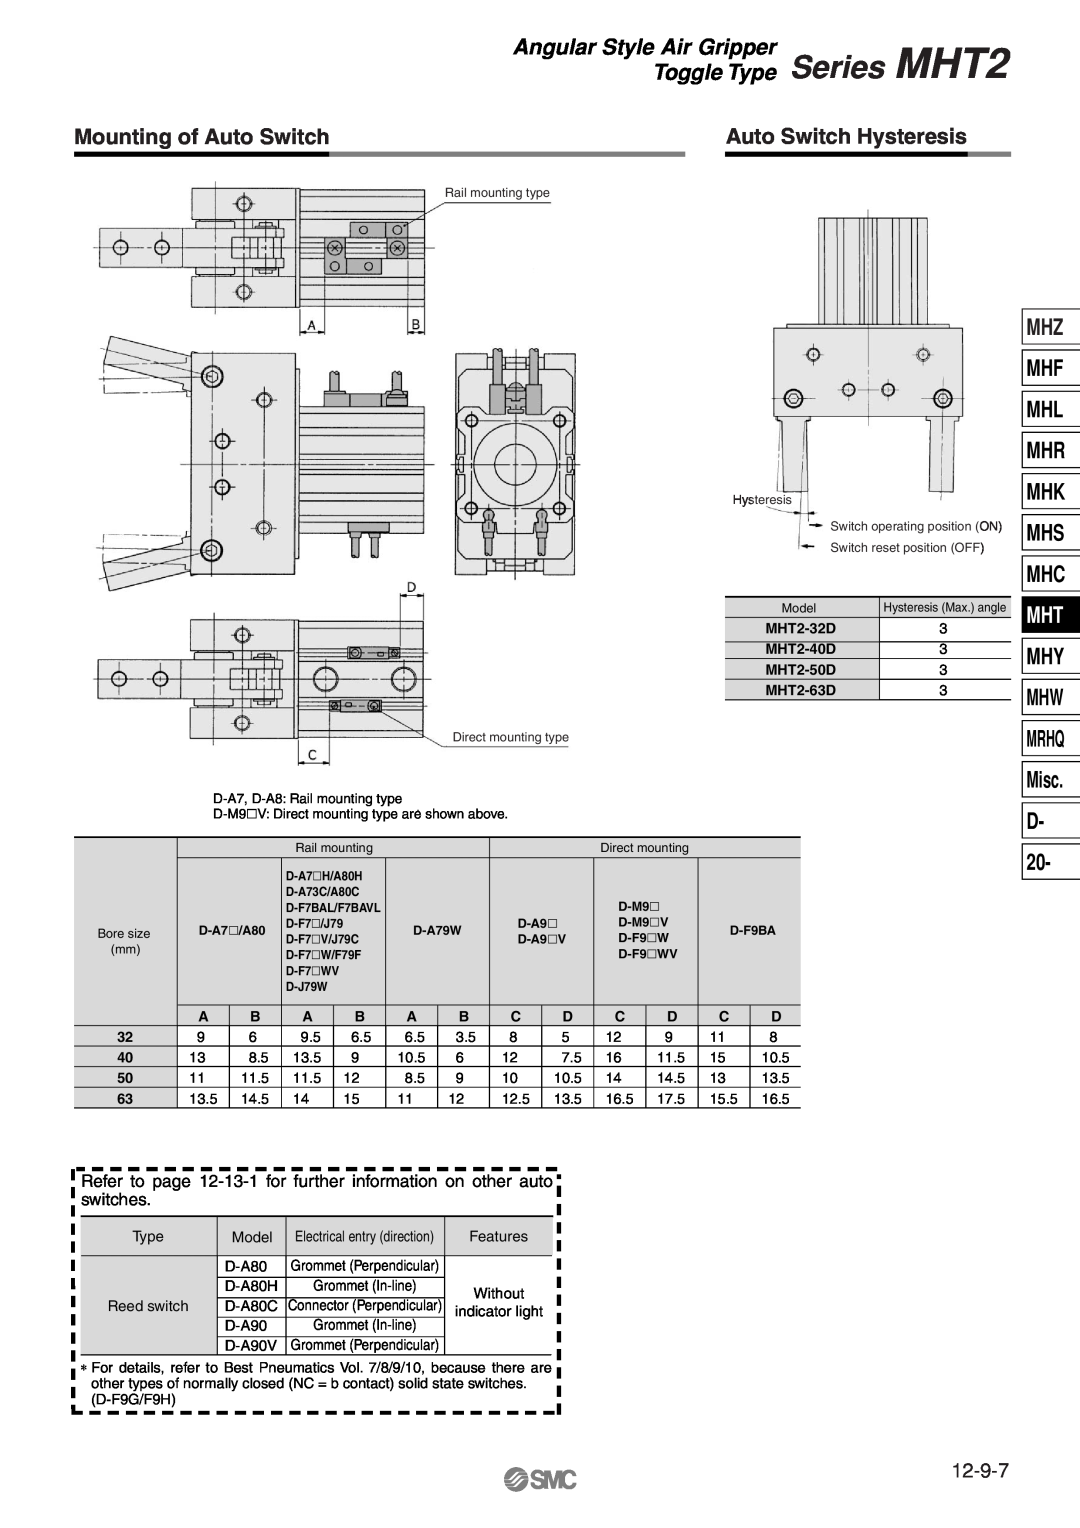 SMC Networks MHT2 manual Mounting of Auto Switch, Auto Switch Hysteresis, Mhf Mhl Mhr Mhk Mhs Mhc, D, Misc, 12-9-7, Mrhq 